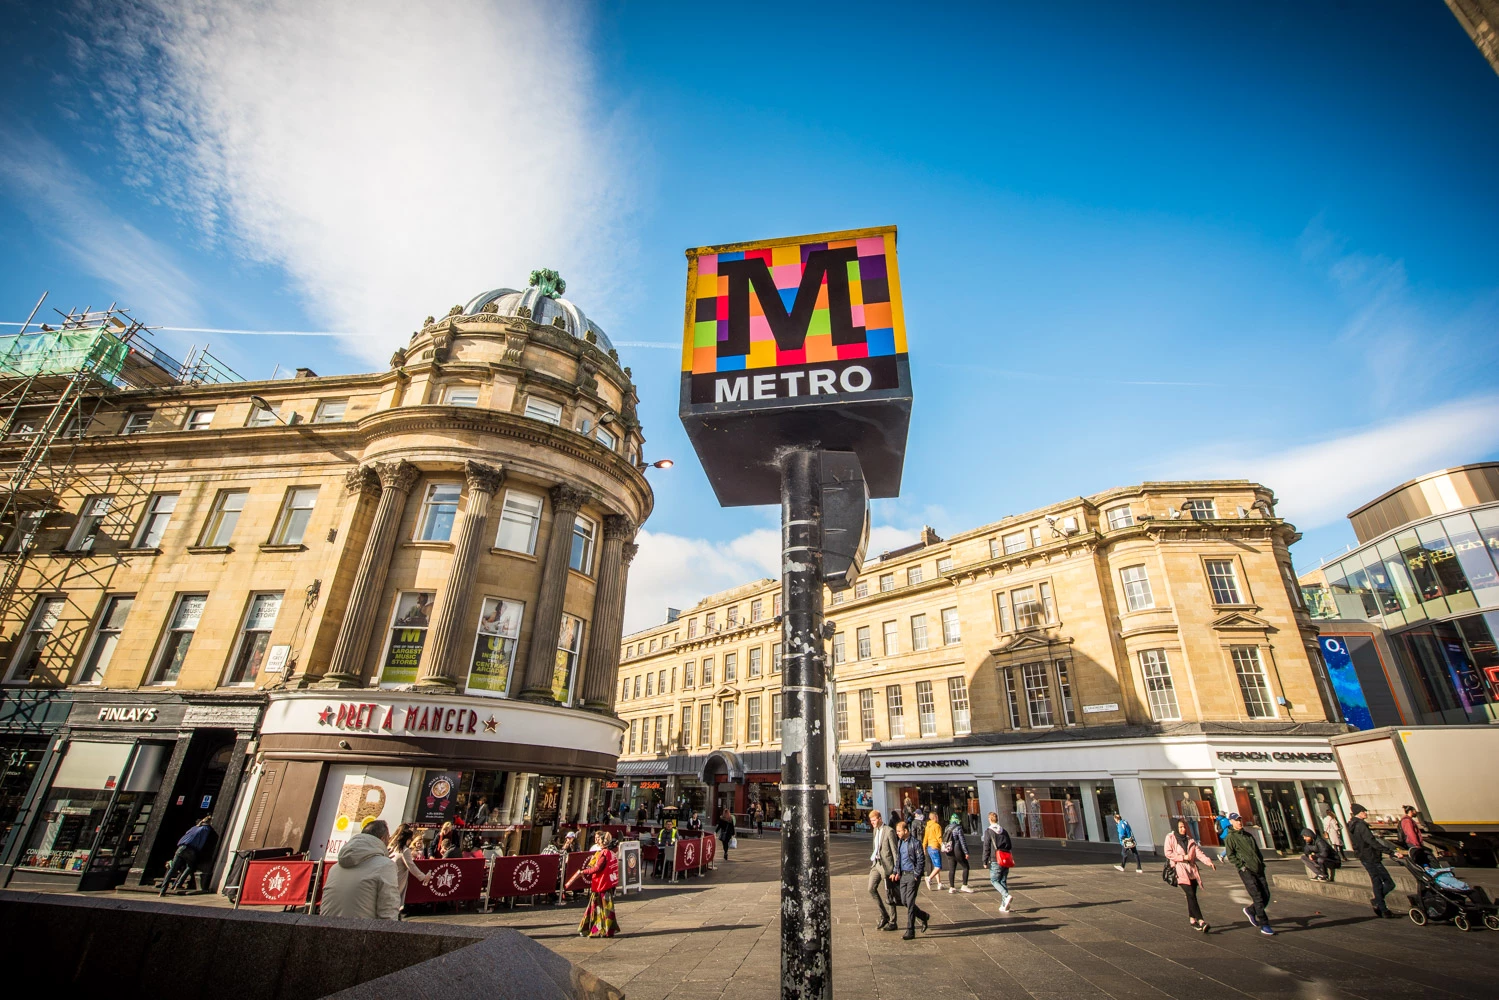 Tyne and Wear Metro’s iconic cube has been transformed into the bright Elmer patchwork